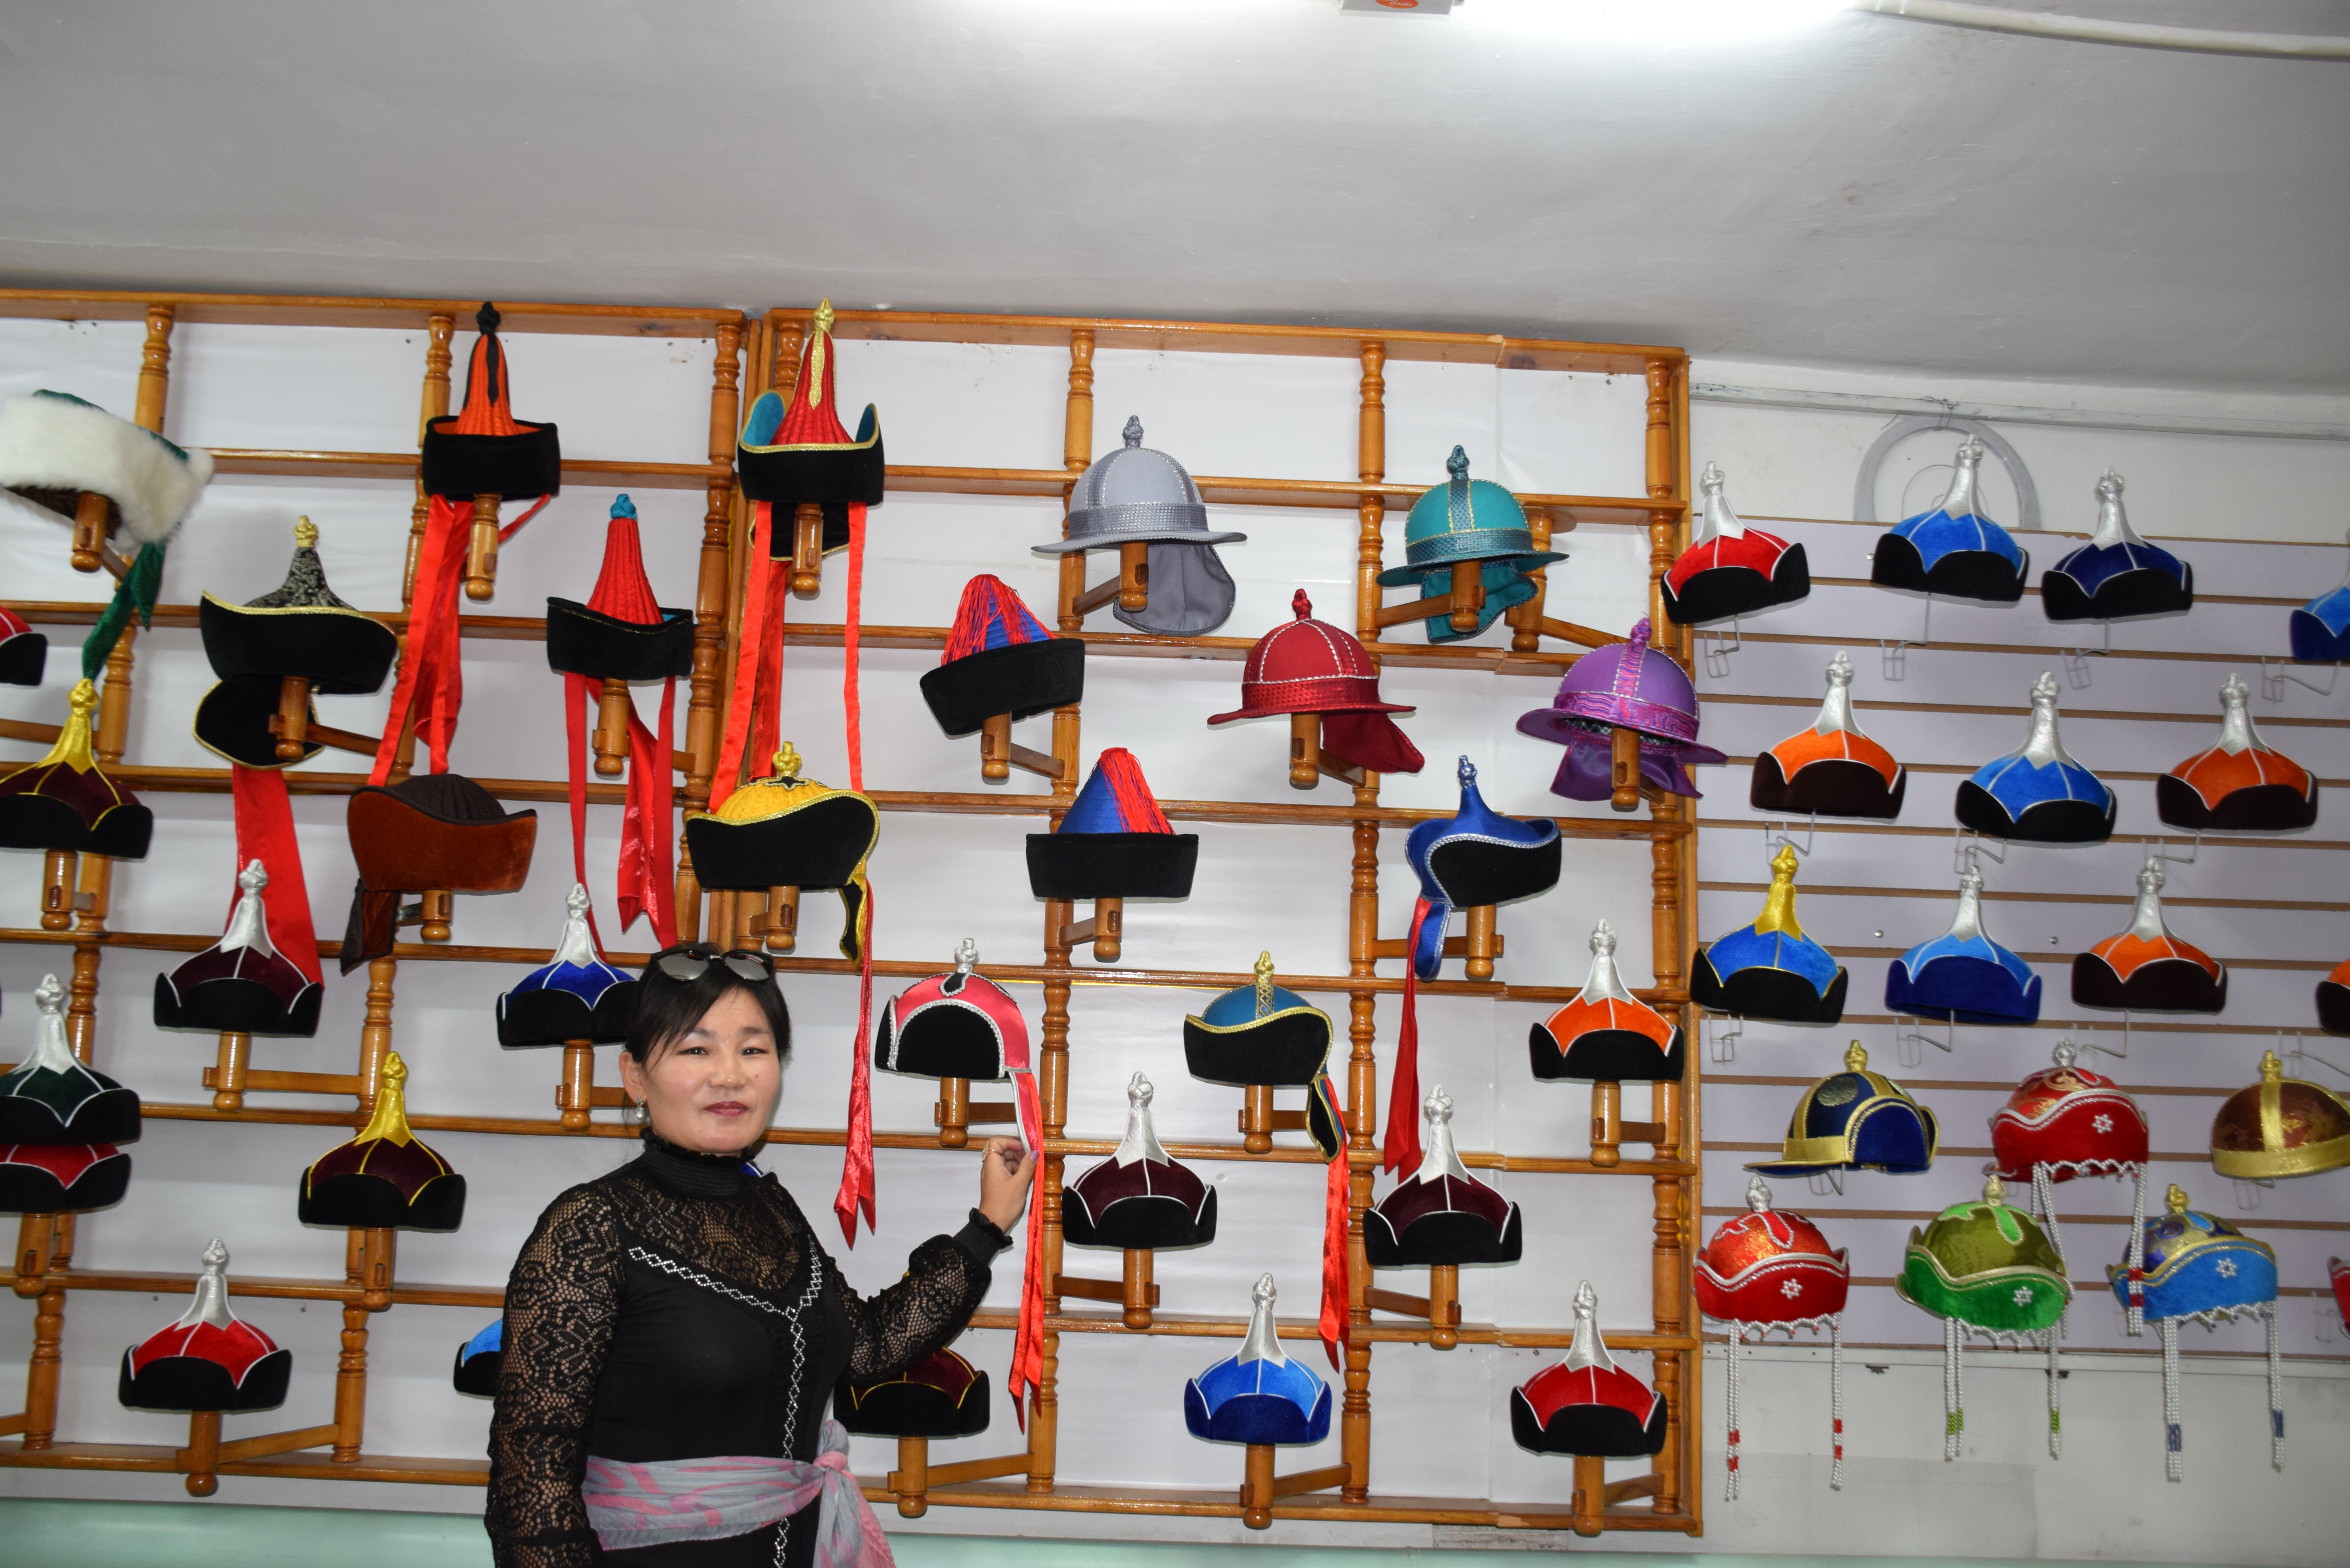 Ankhtuya with her expanded hat stall 